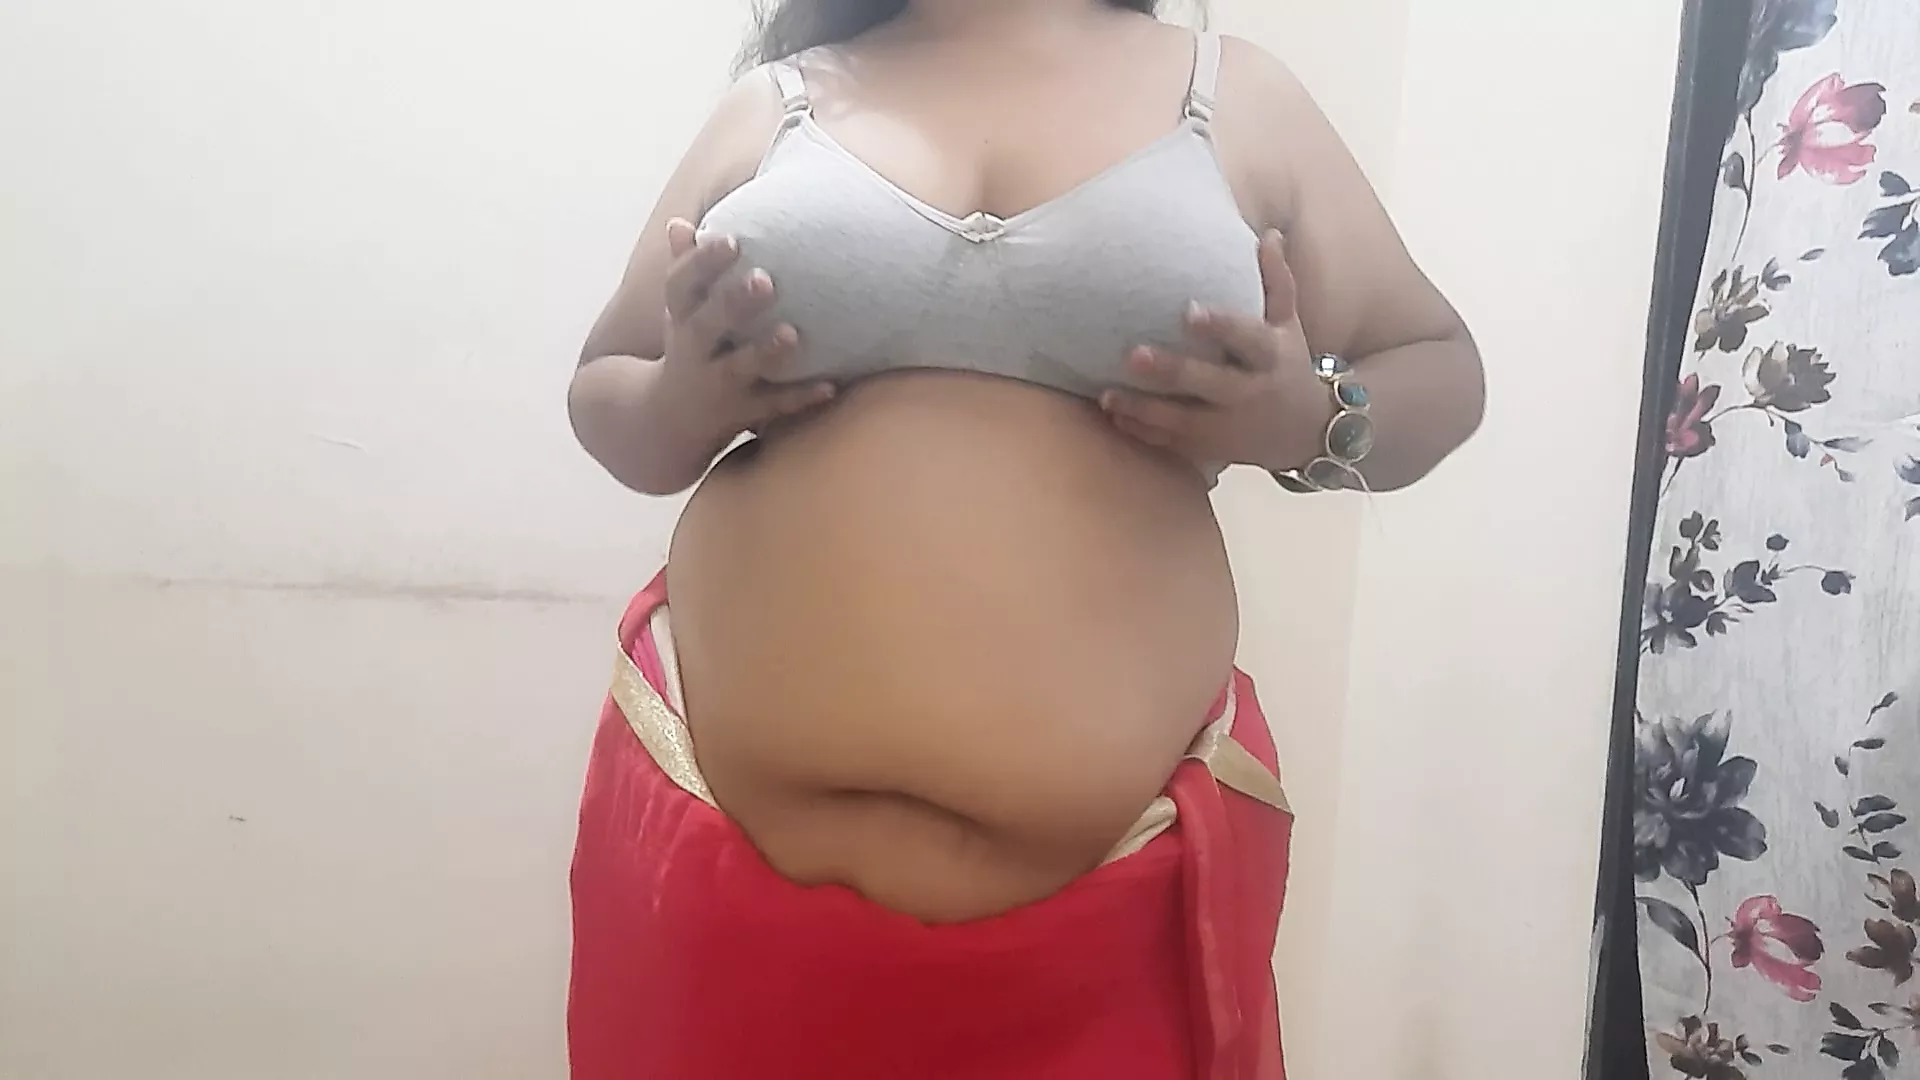 Desi Indian Naughty Horny Wife Stripping out of Saree Part 1 | xHamster